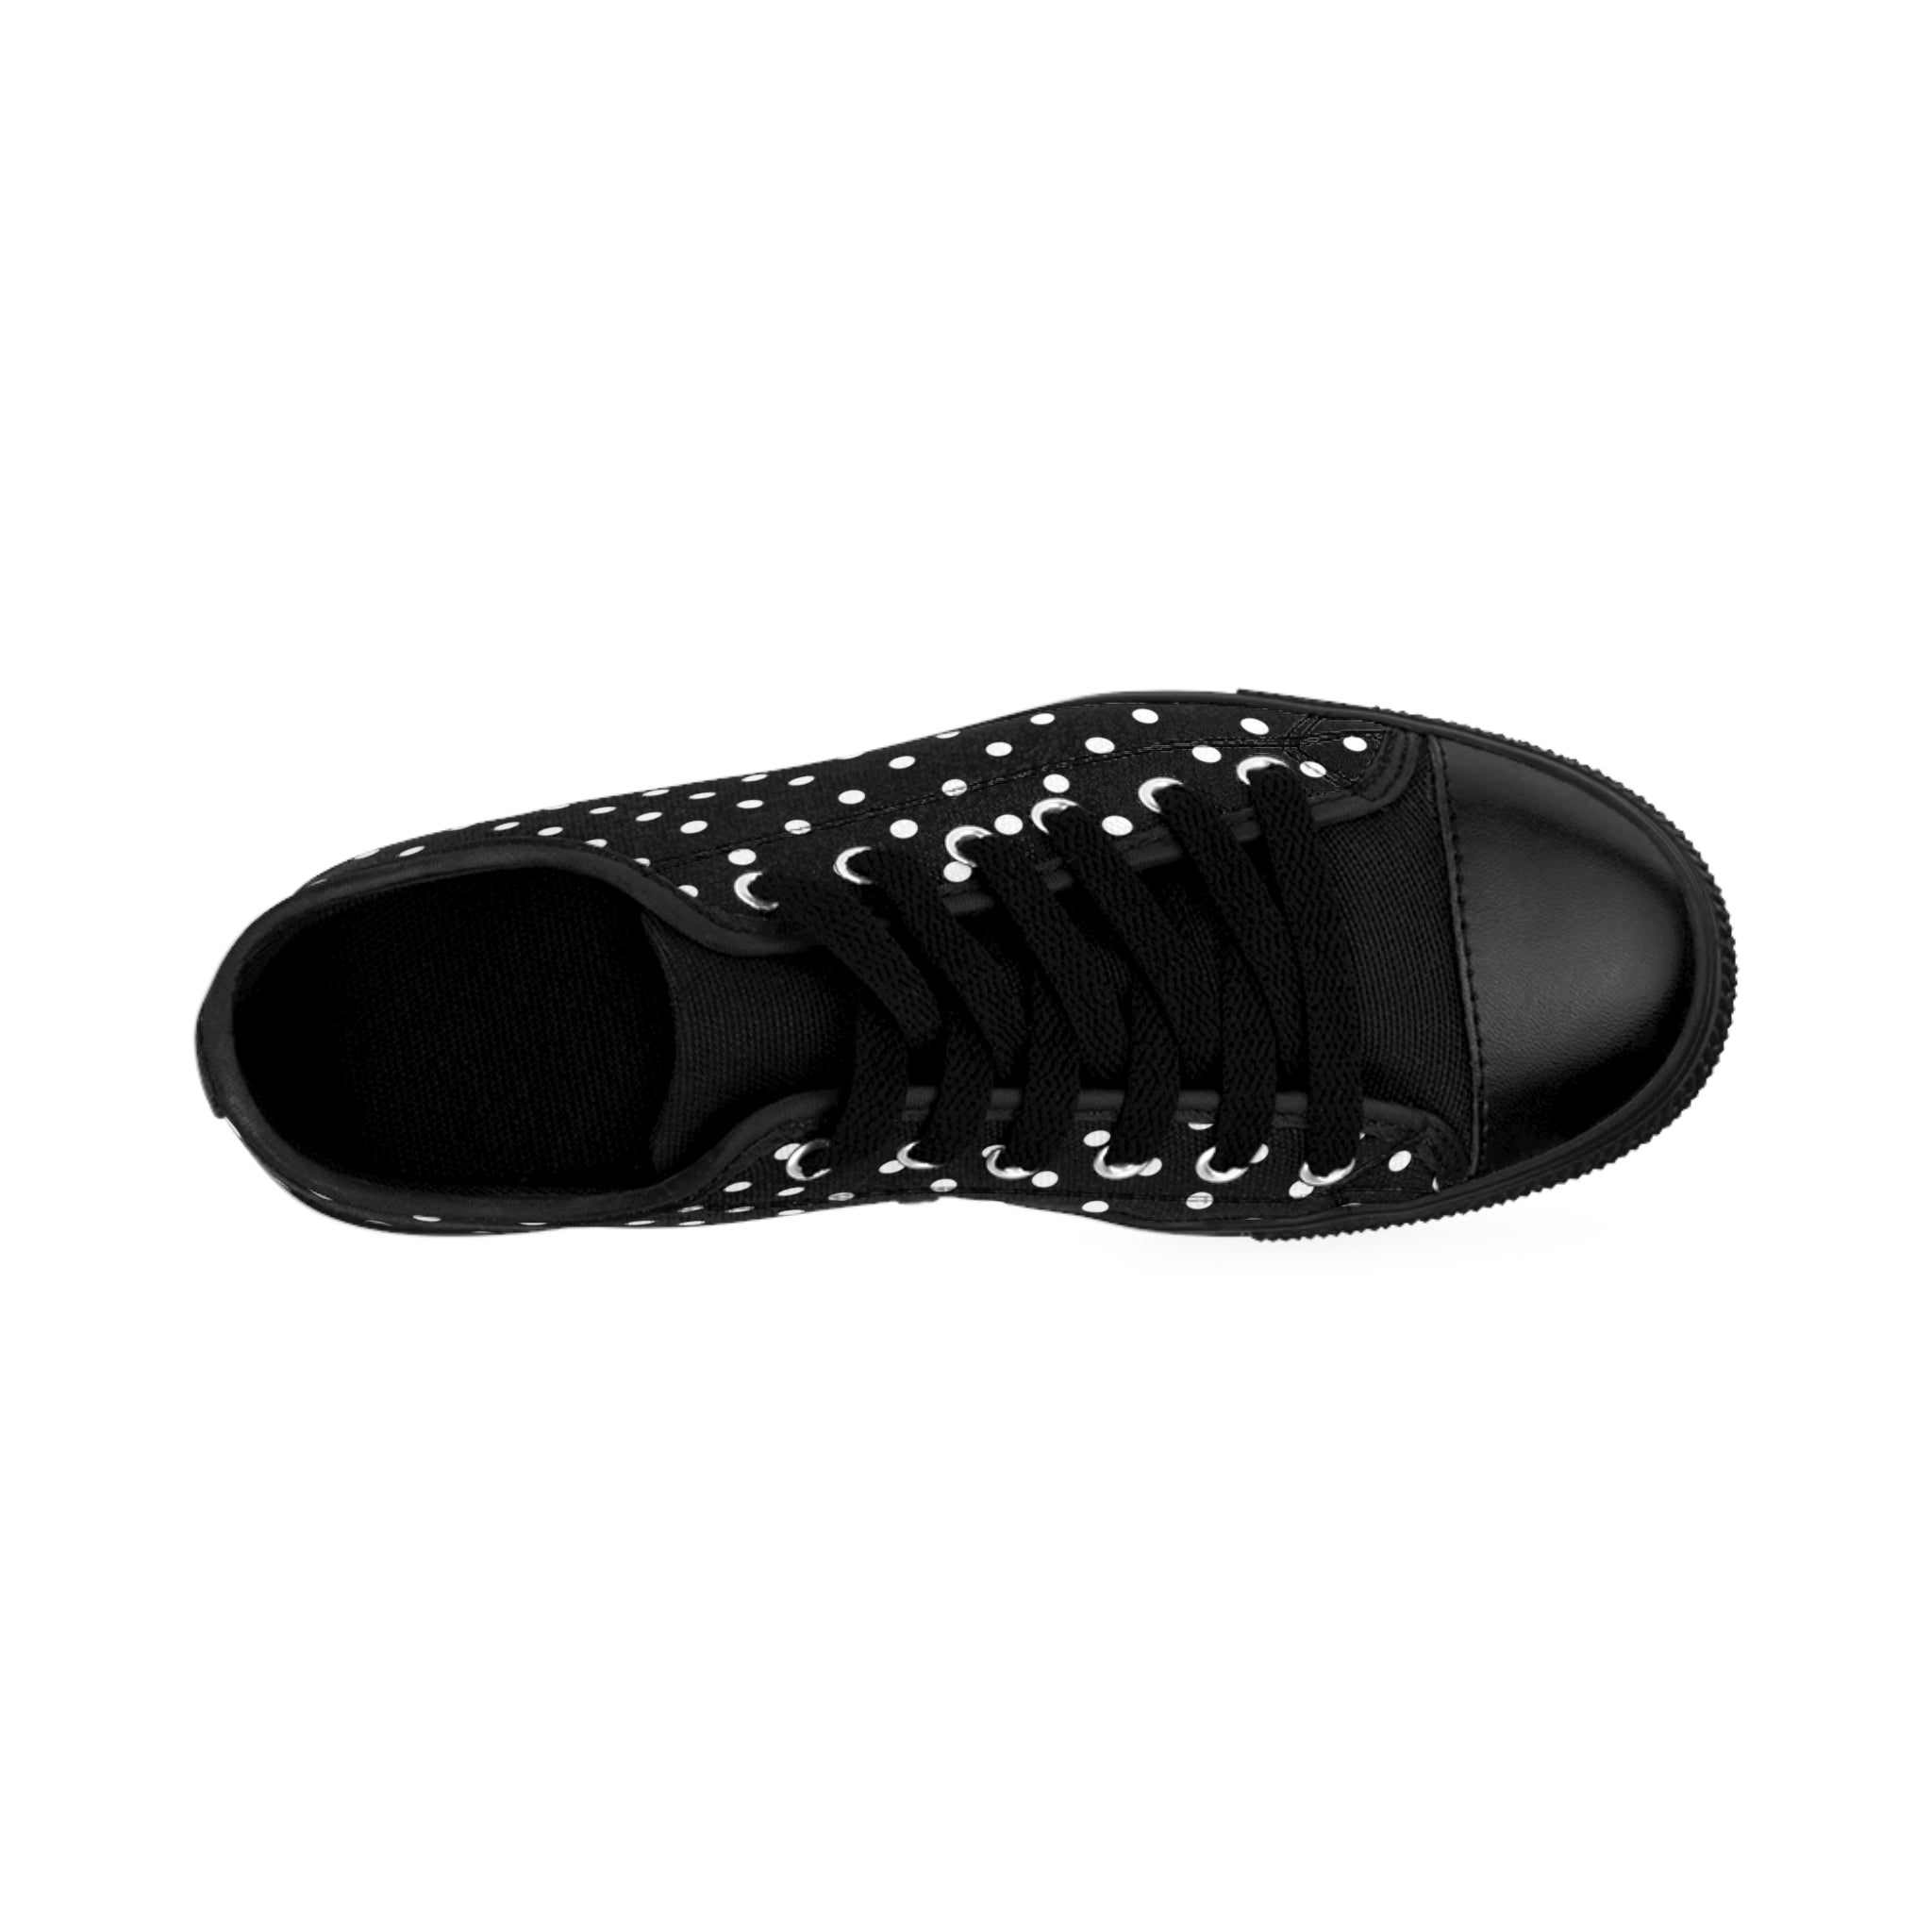 Polka Dots For days (Pattern in White) Black Women's Low Top Canvas Shoes Shoes  The Middle Aged Groove